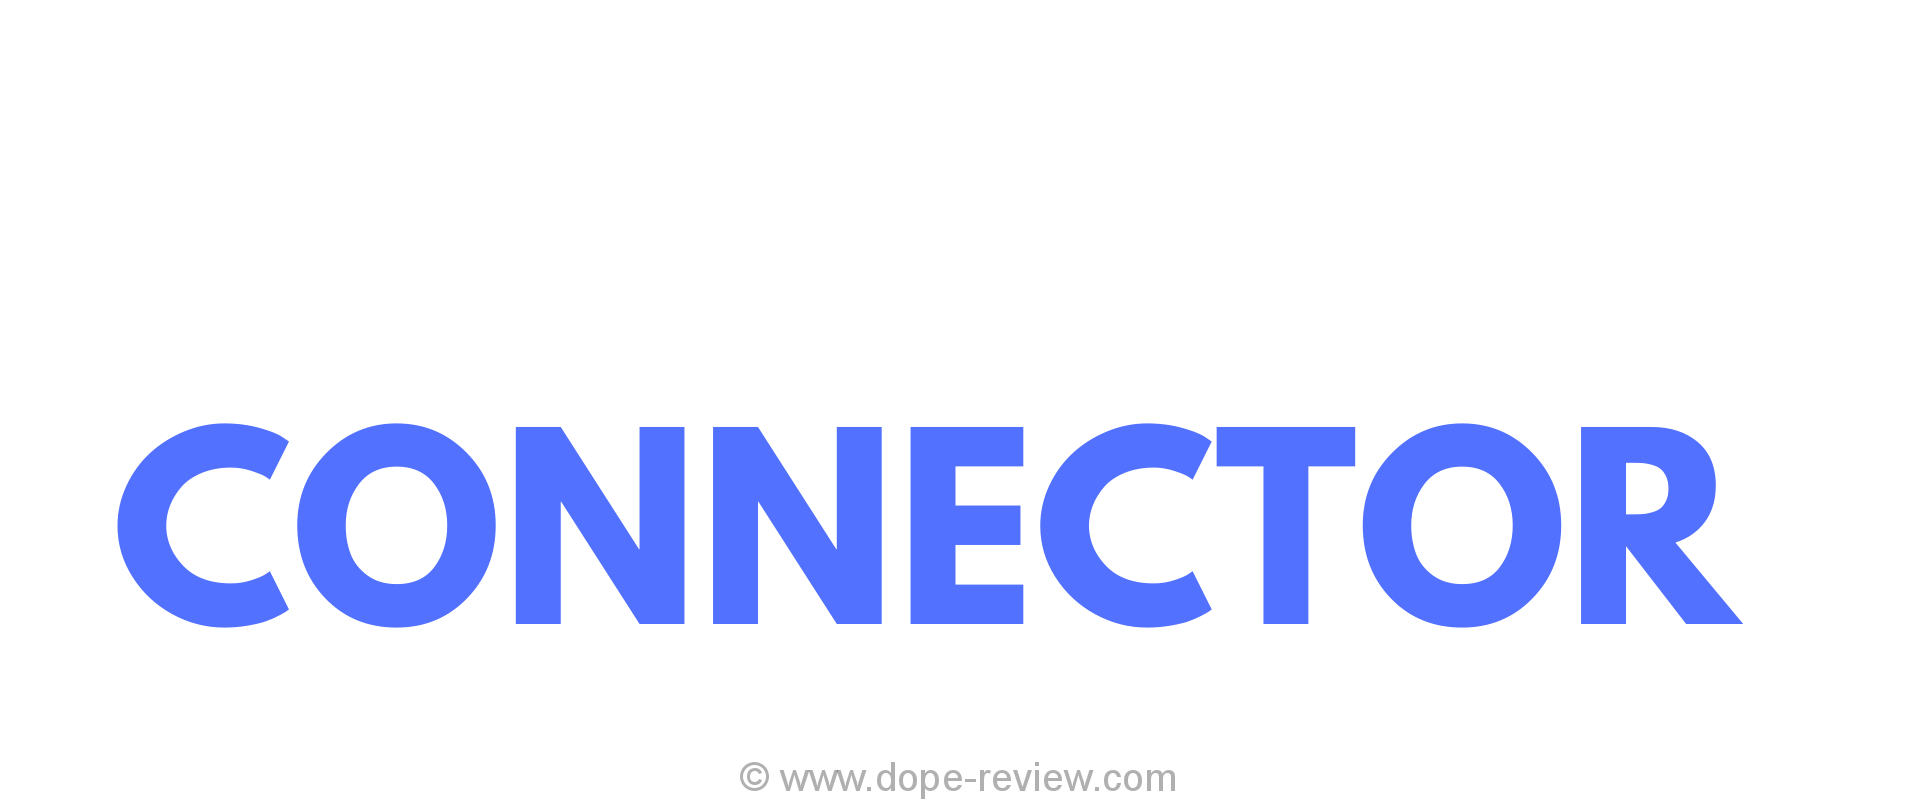 Text Connector